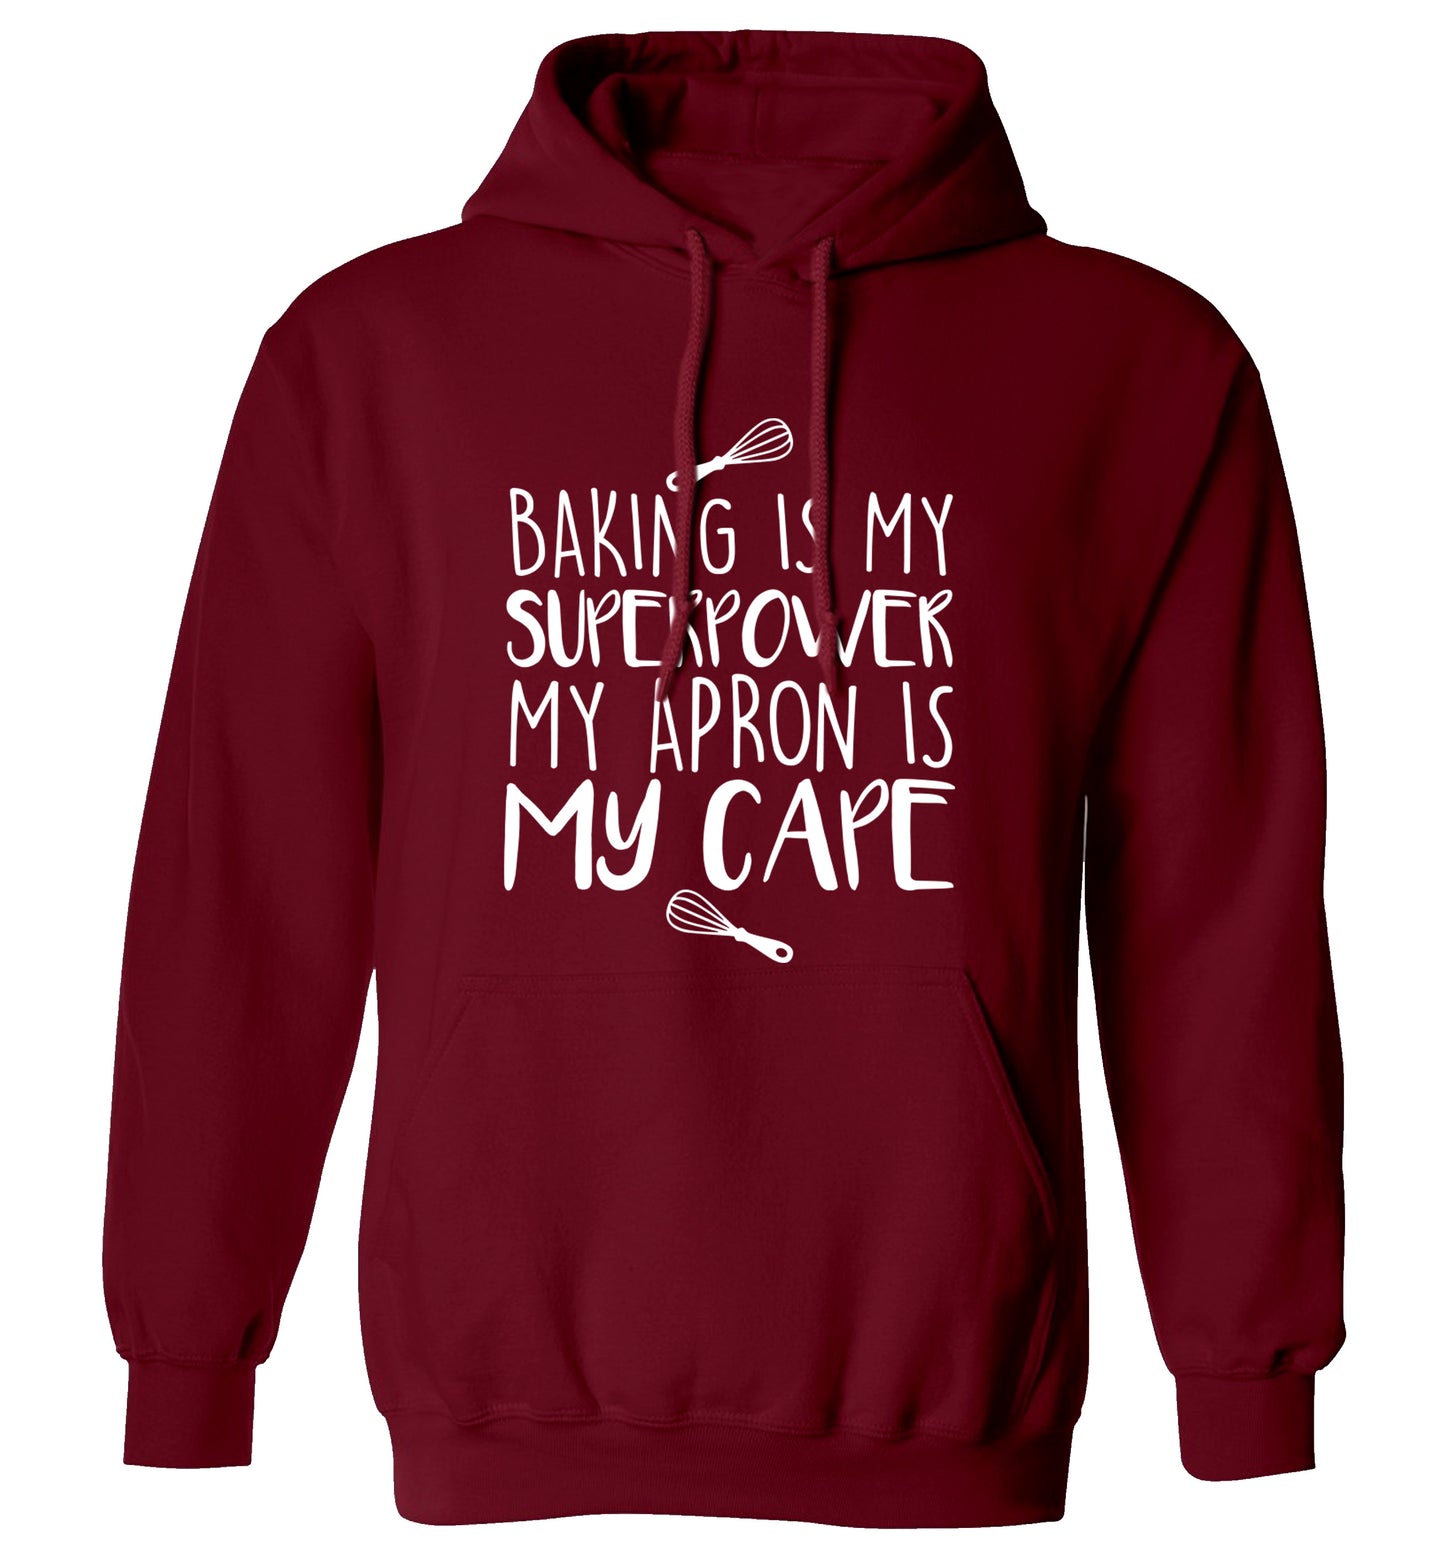 Baking is my superpower my apron is my cape adults unisex maroon hoodie 2XL